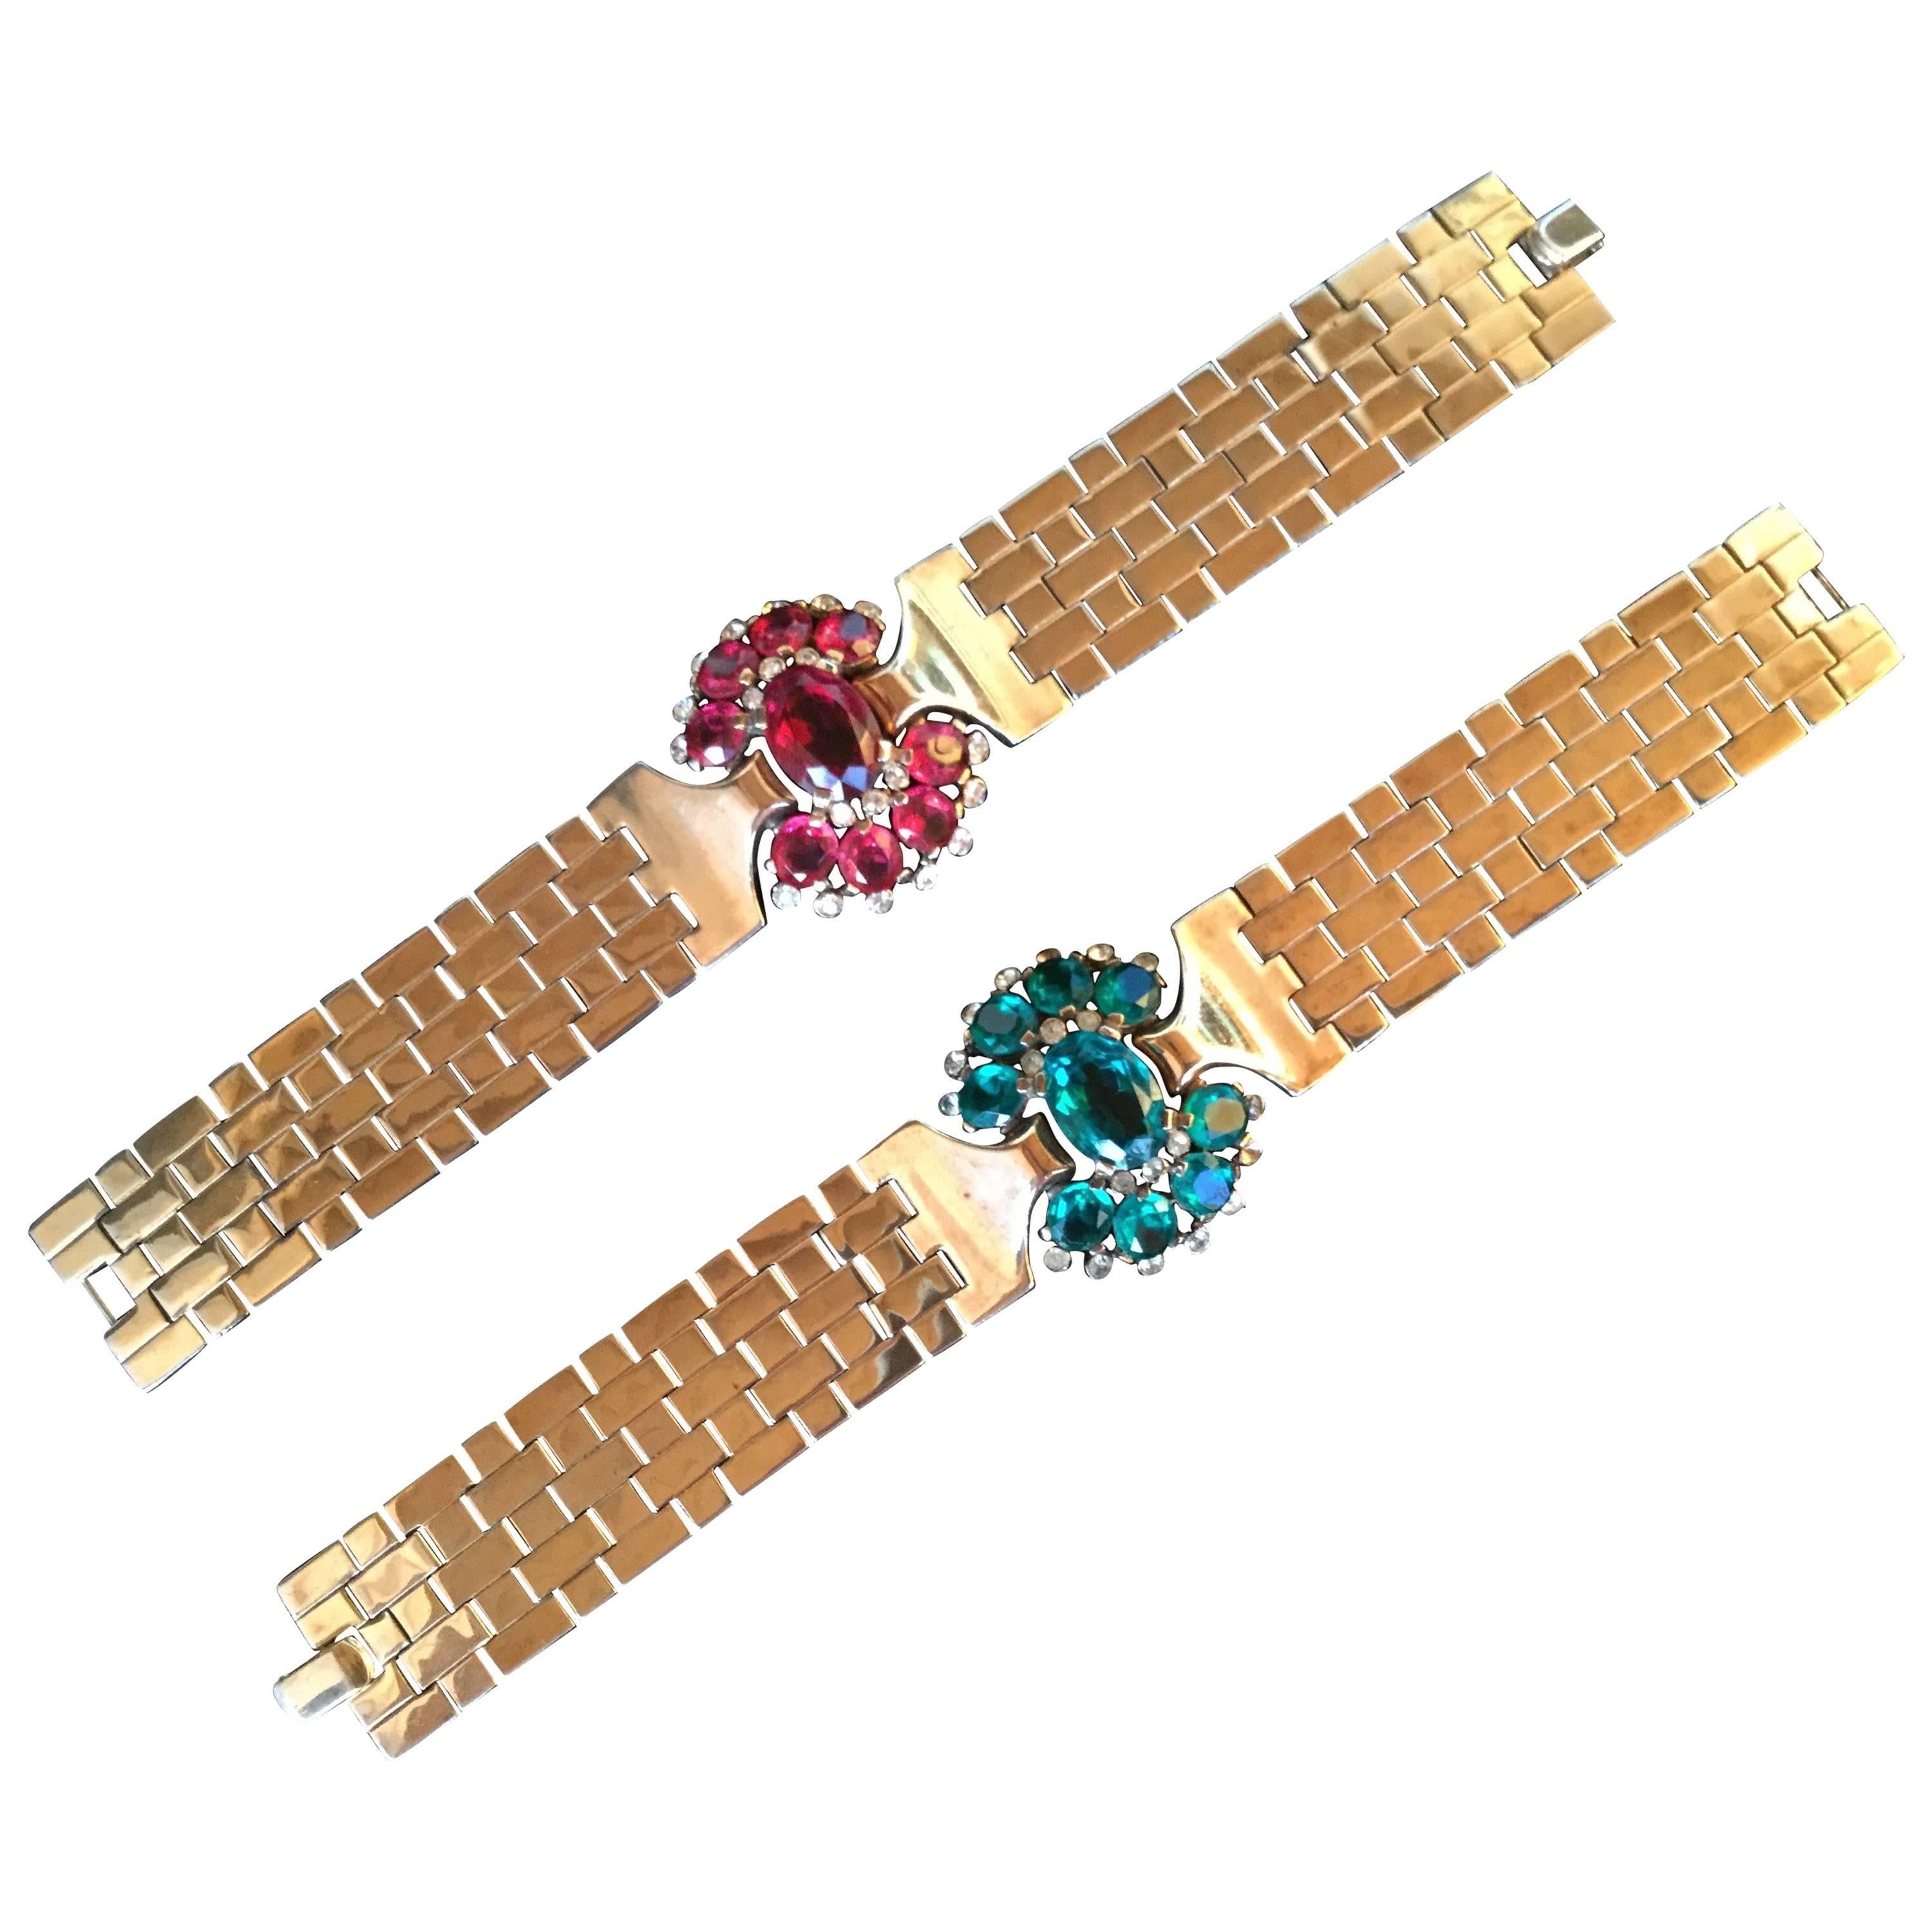 Spectacular Pair of Trifari Bracelets Designed by Alfred Philippe. Retro Style.